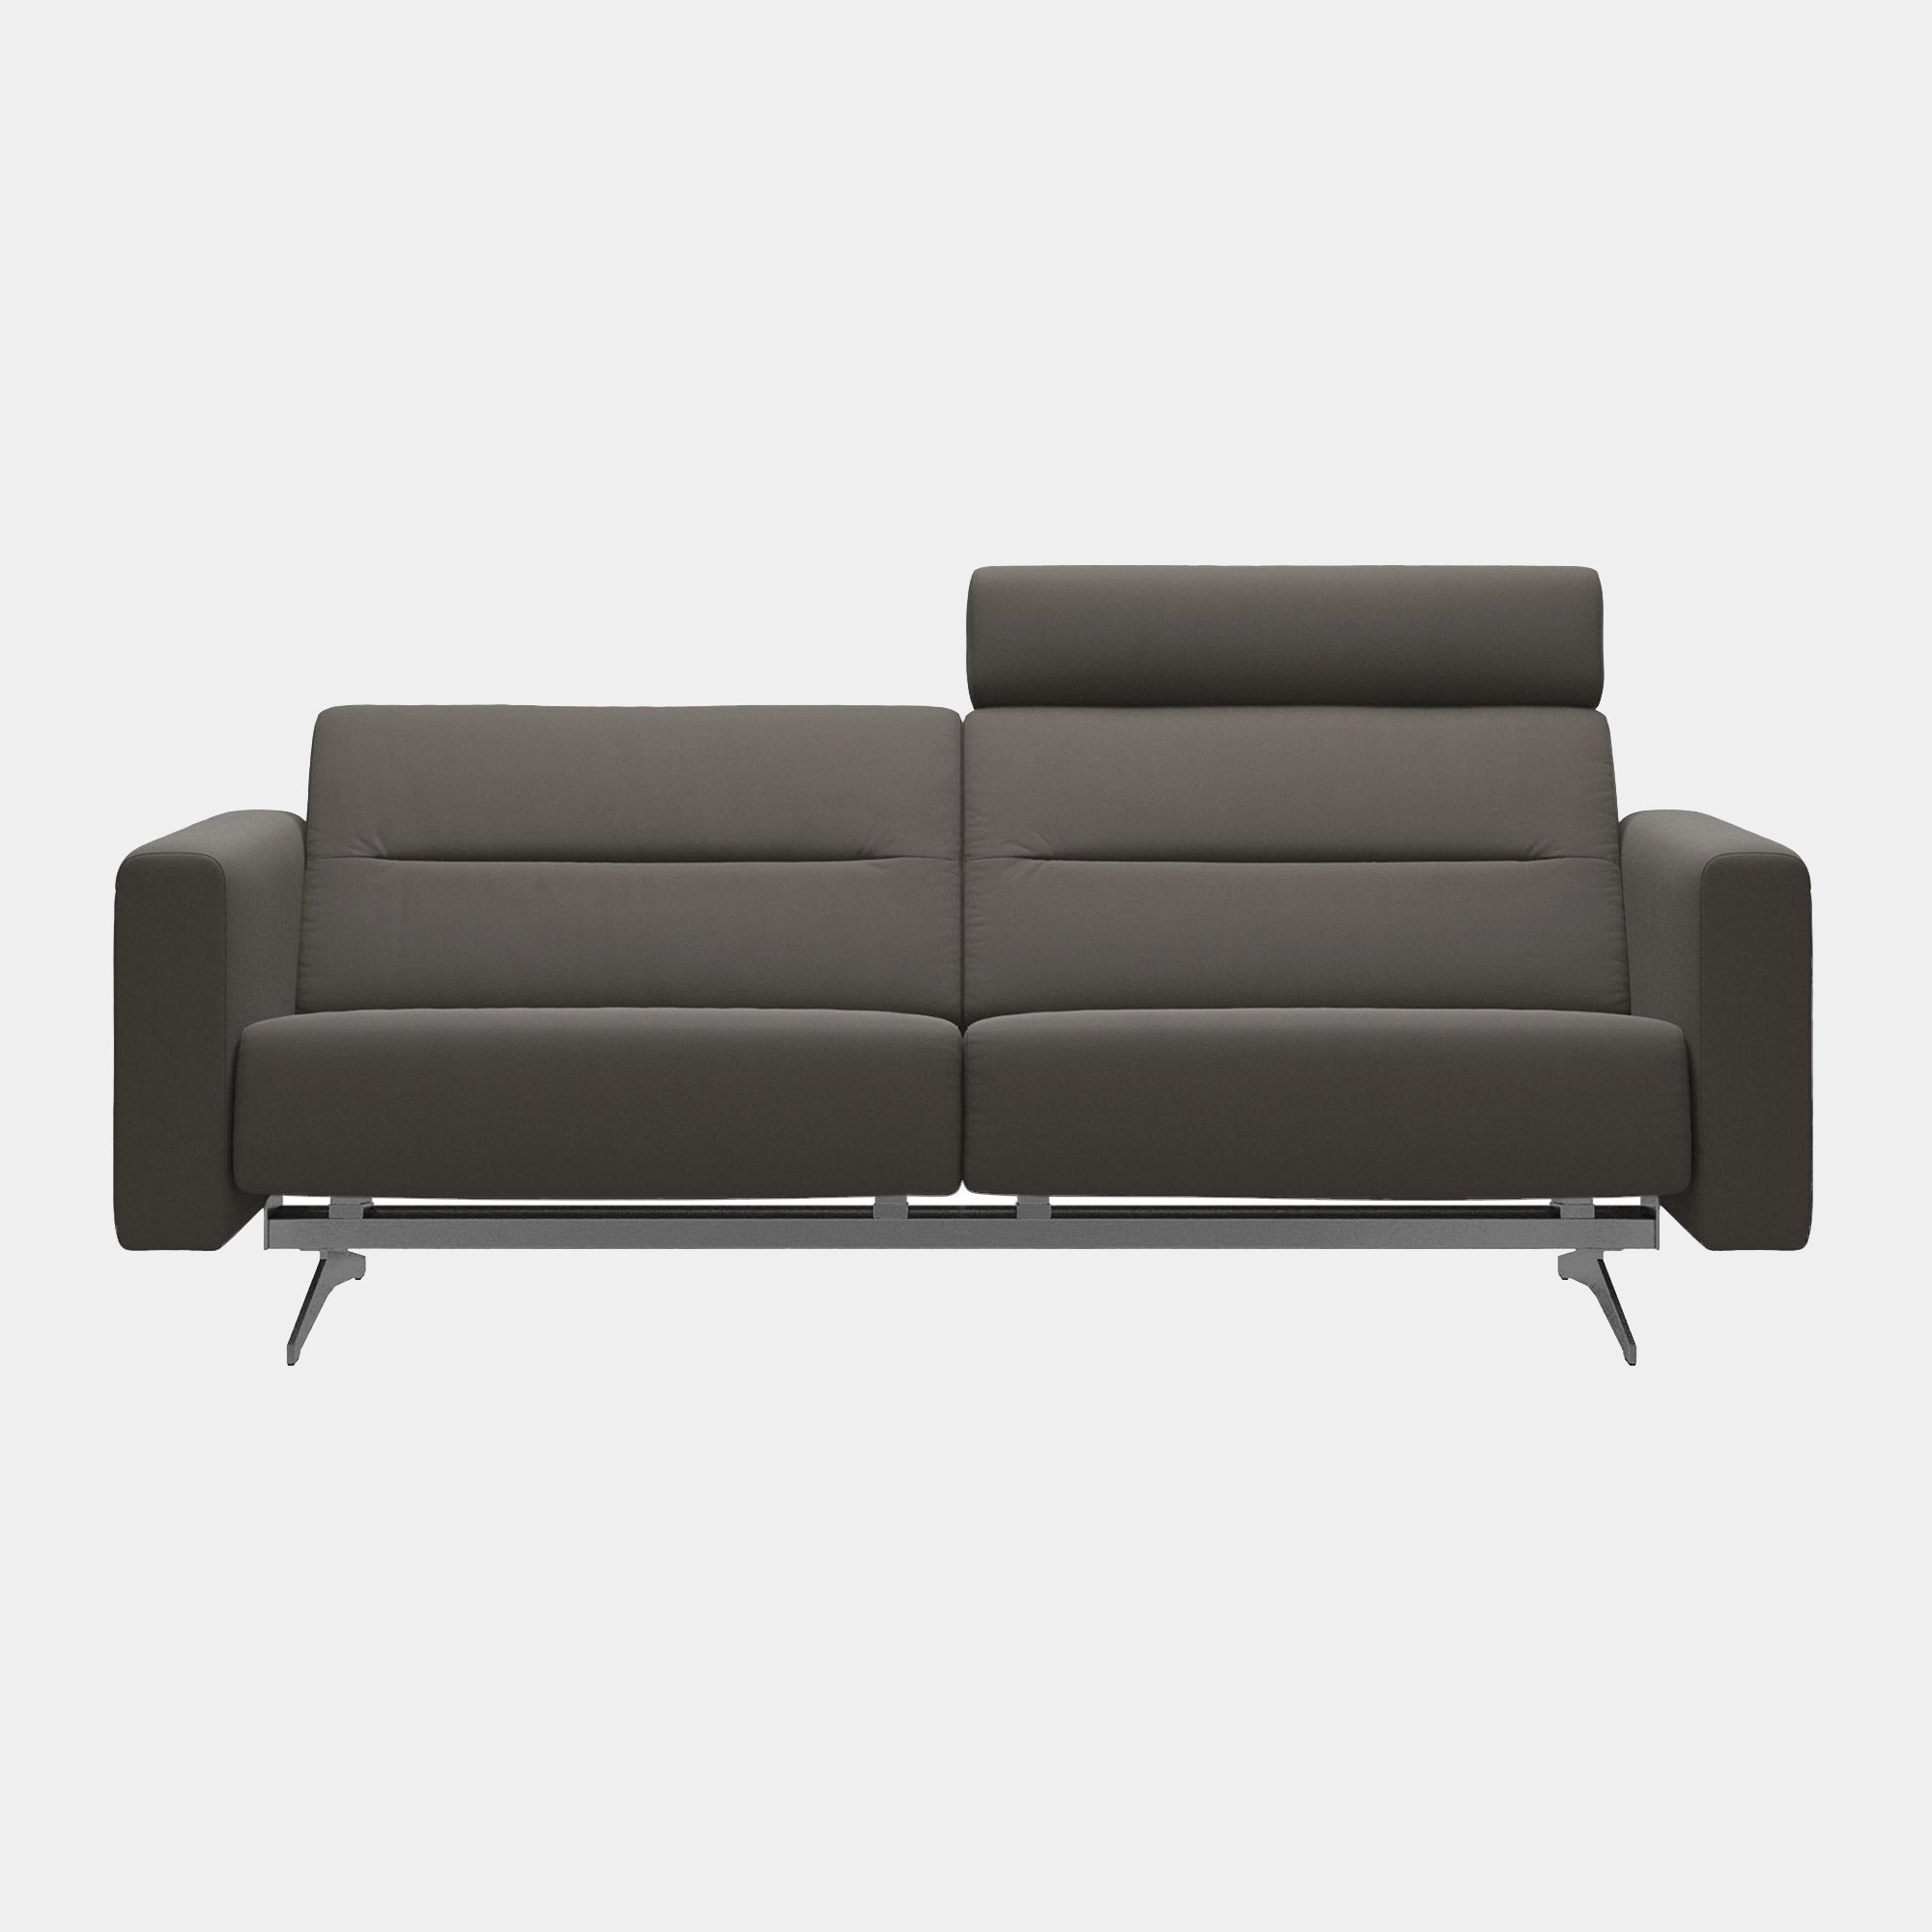 Stressless Stella - 2.5 Seat Sofa In Leather Paloma Metal Grey With Chrome Foot